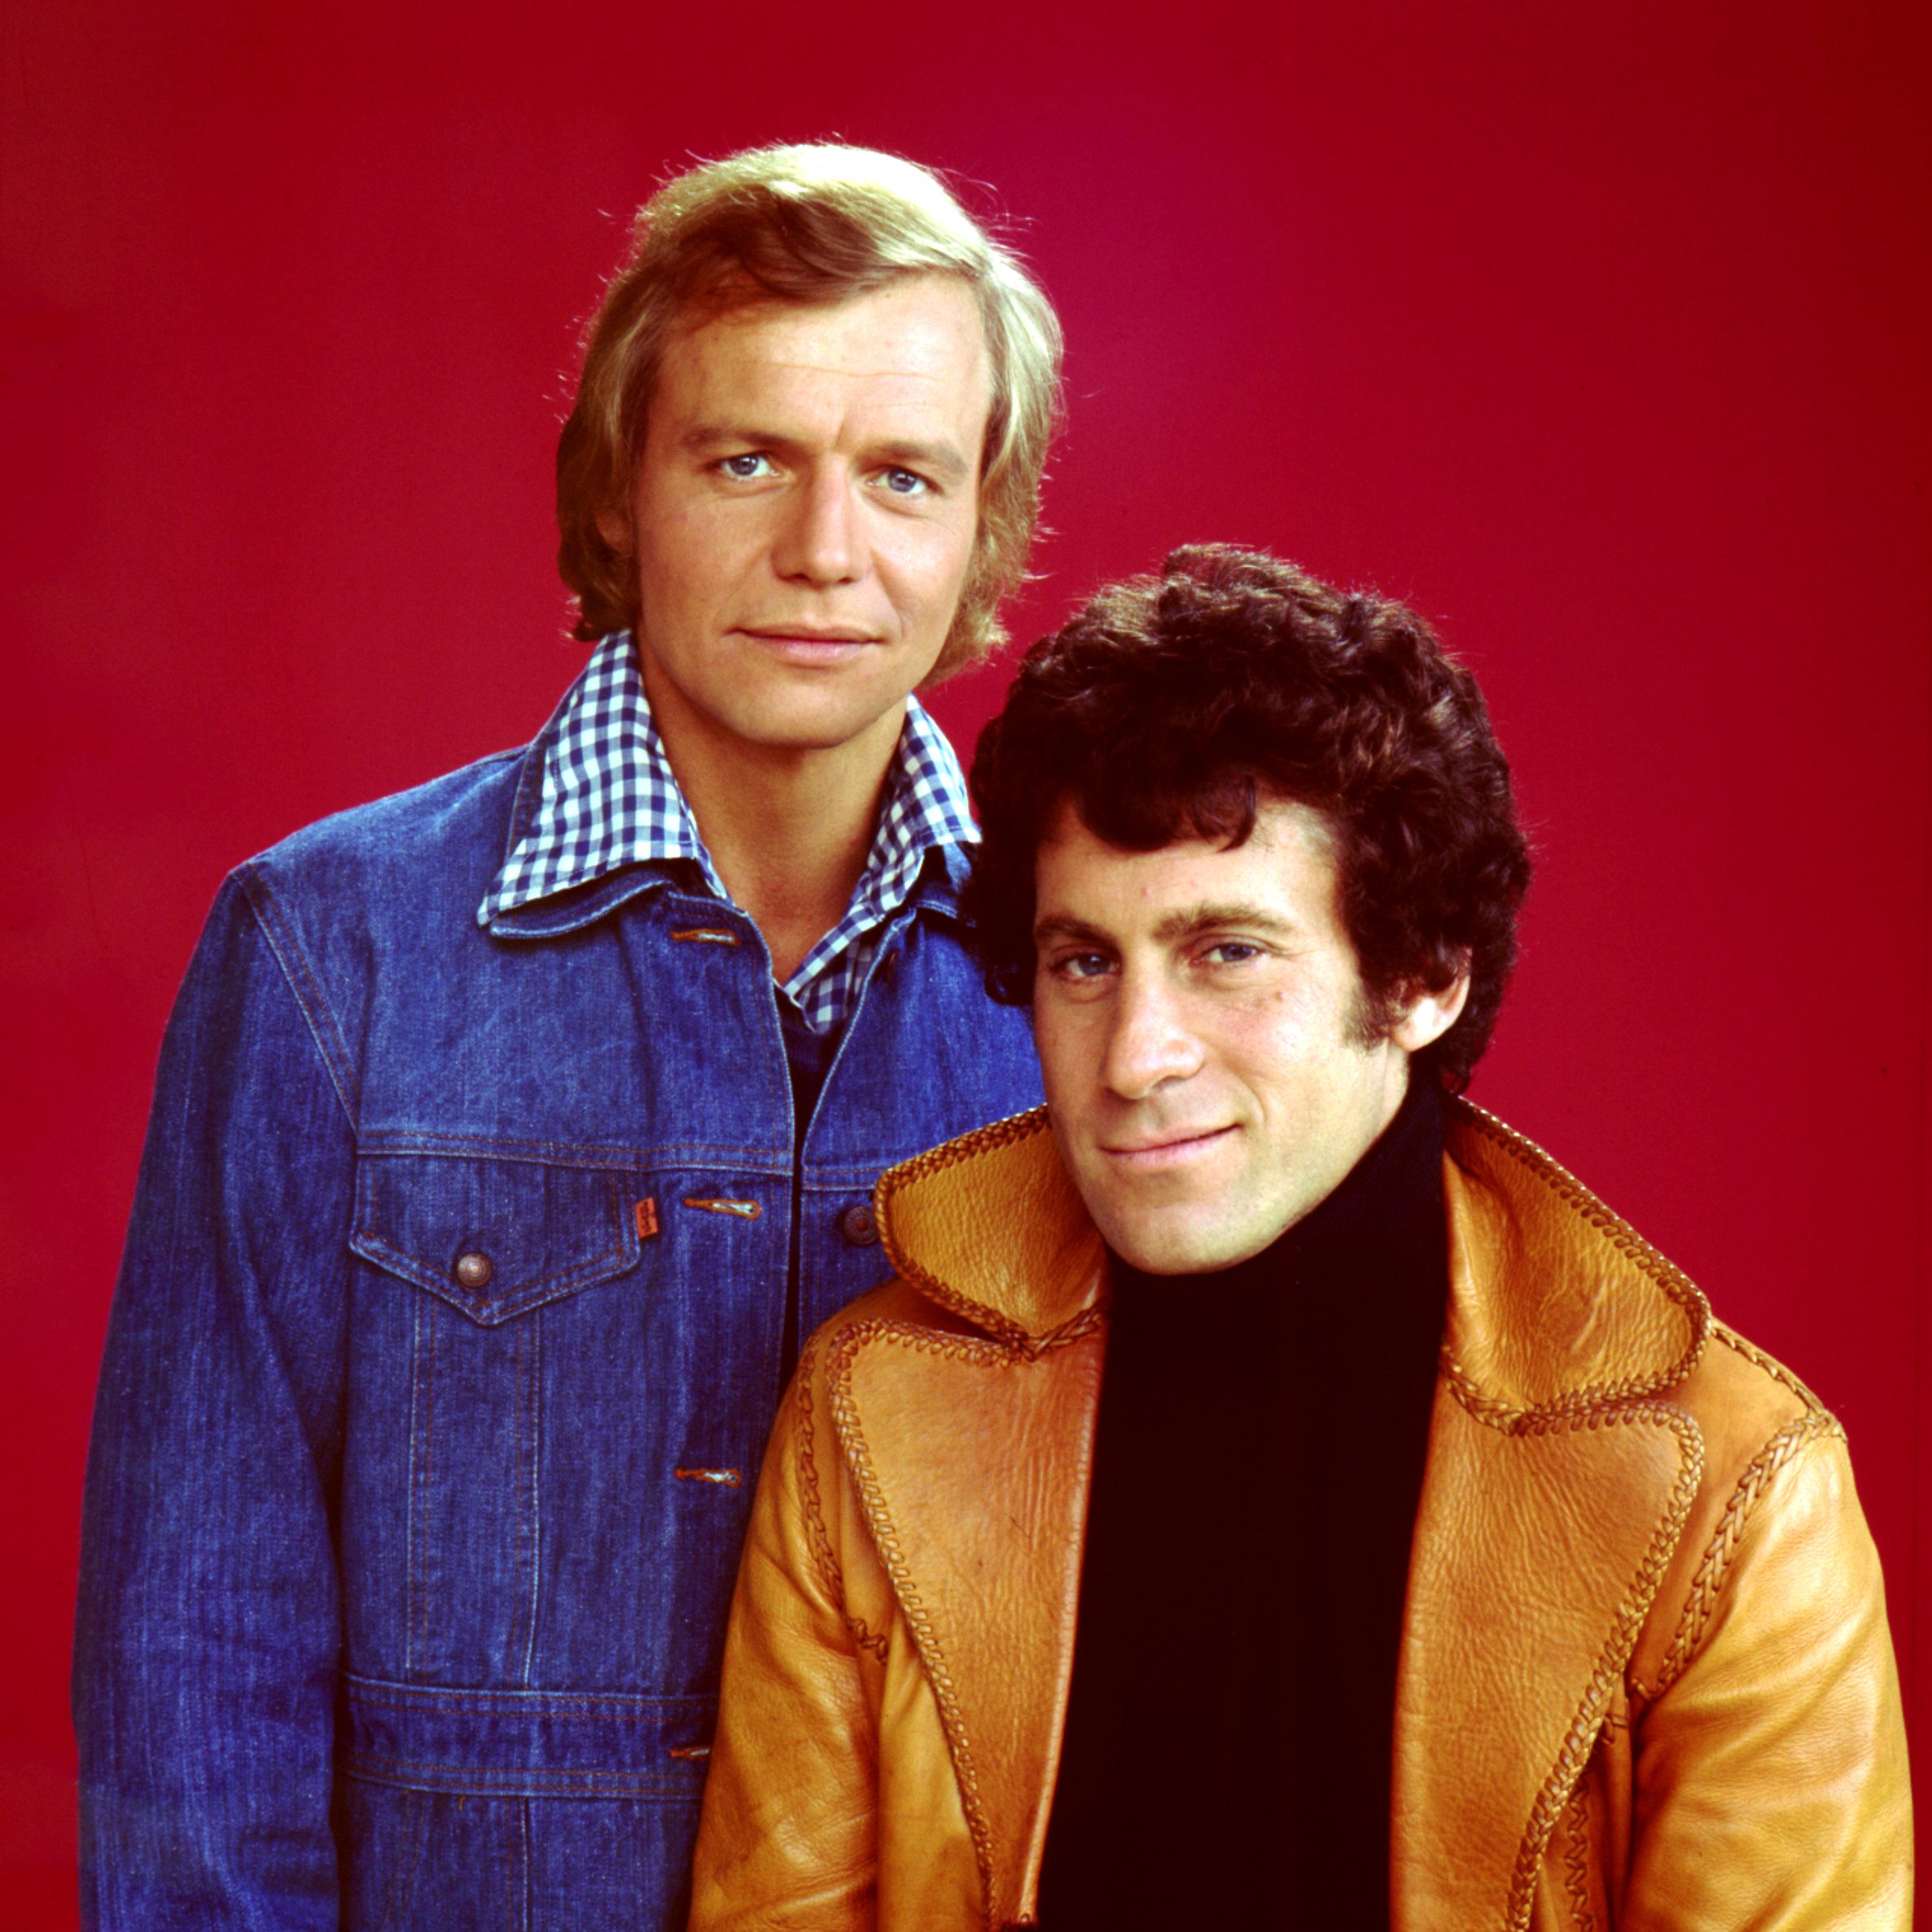 Portrait of David Soul and Paul Michael Glaser from the Starsky and Hutch TV show cast, 1970